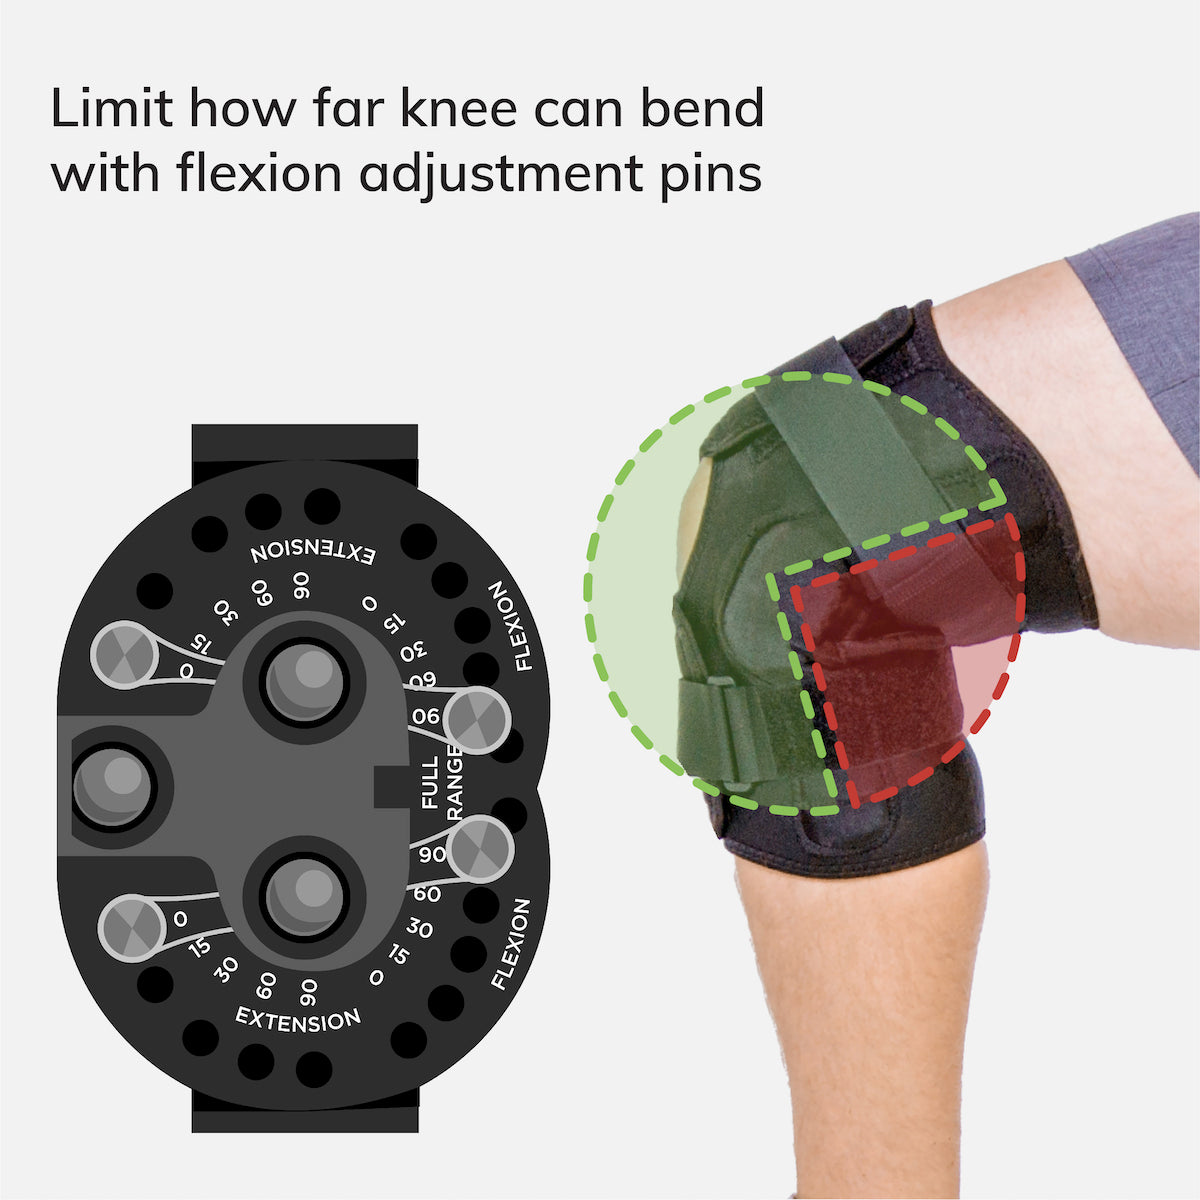 Adjusting the flexion pins prevent how far you can bend your knee, generally used after a meniscus tear or surgery